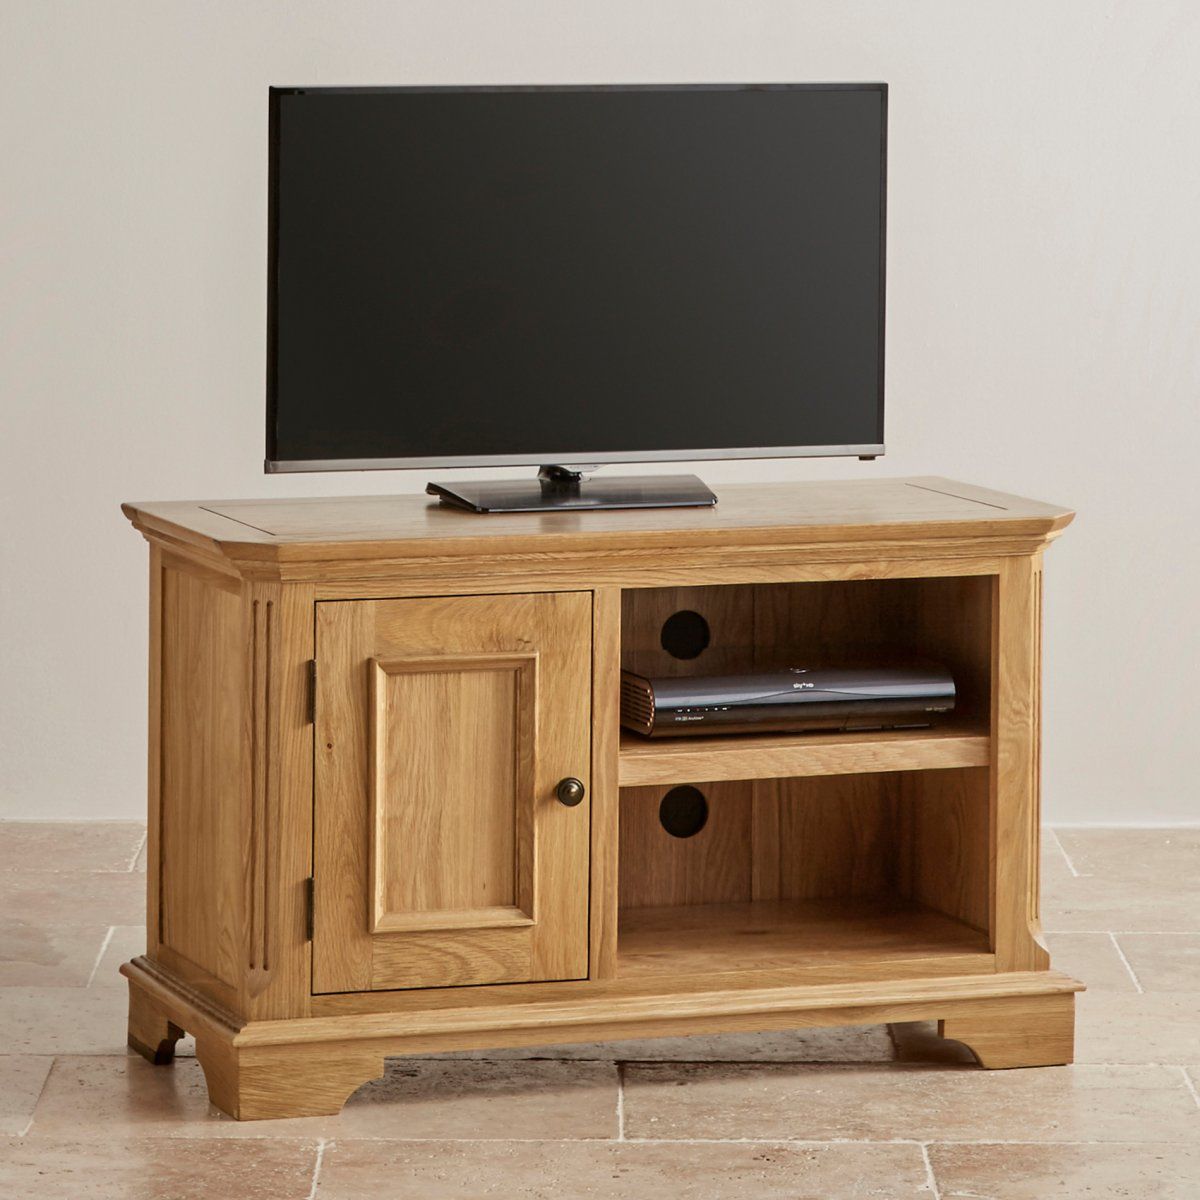 Edinburgh Small Tv Cabinet In Solid Oak | Oak Furniture Land Throughout Tv Stands And Cabinets (Photo 4 of 15)